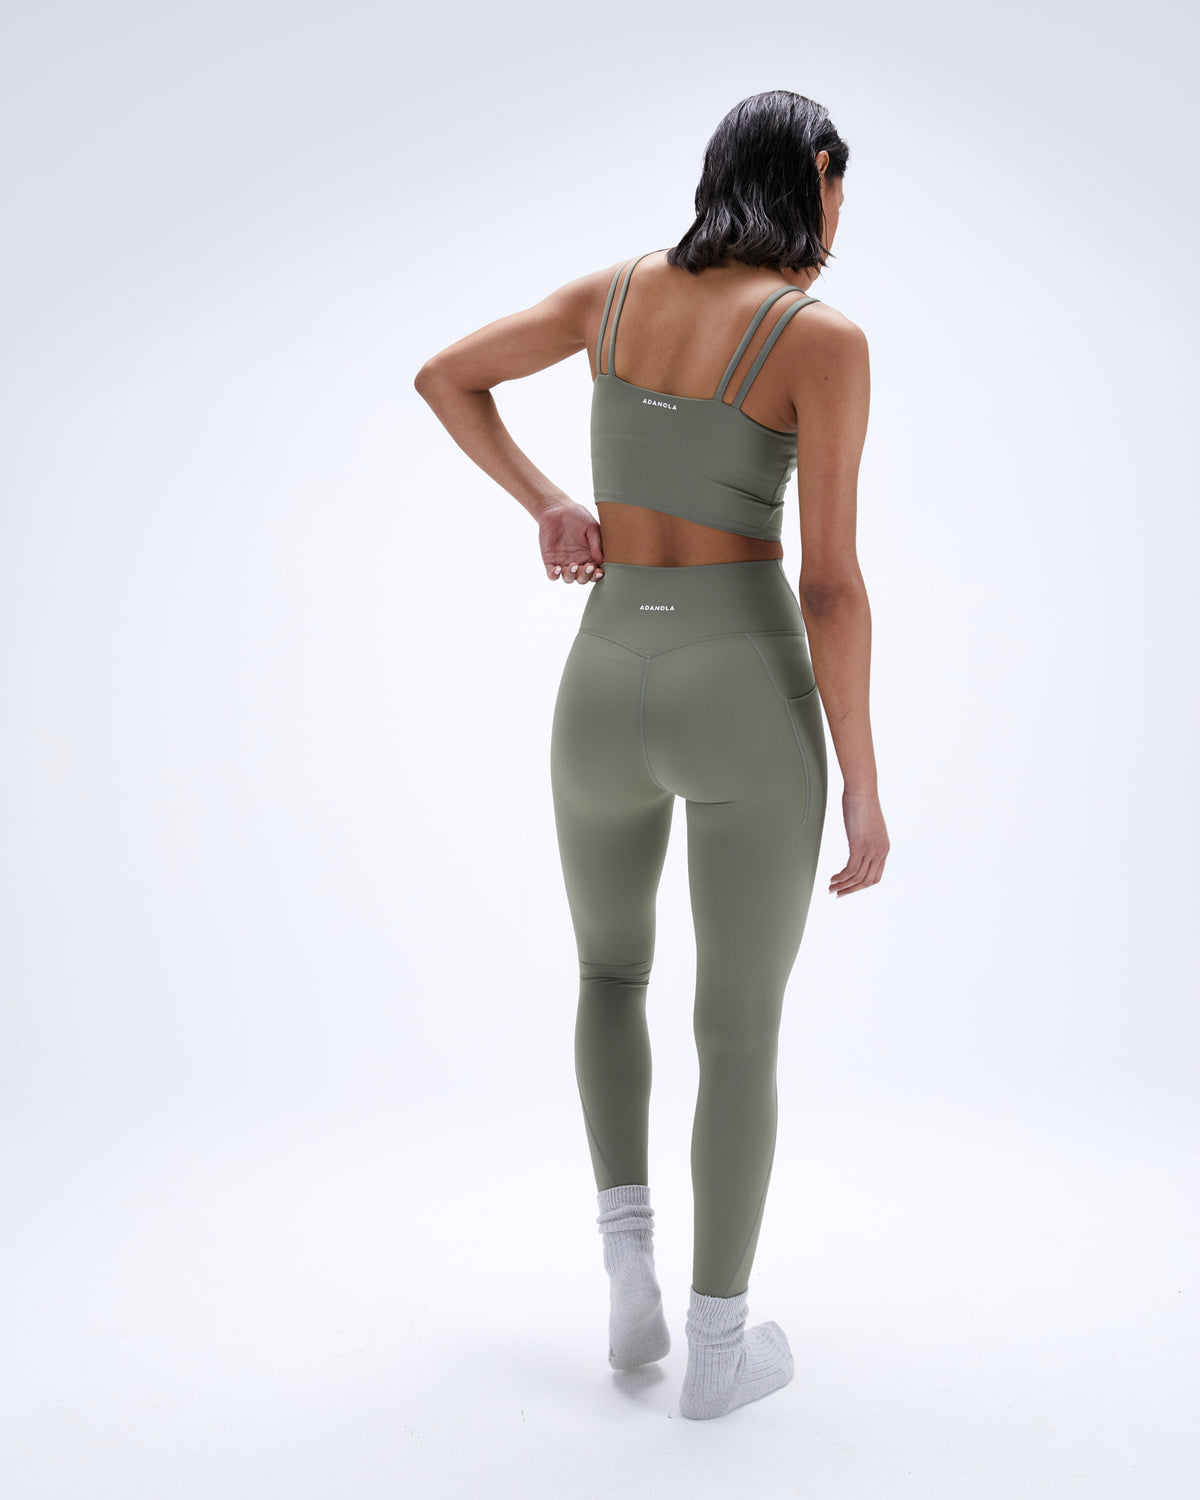 CLV Green Recycled Leggings with Pockets – C'est Lä Vé